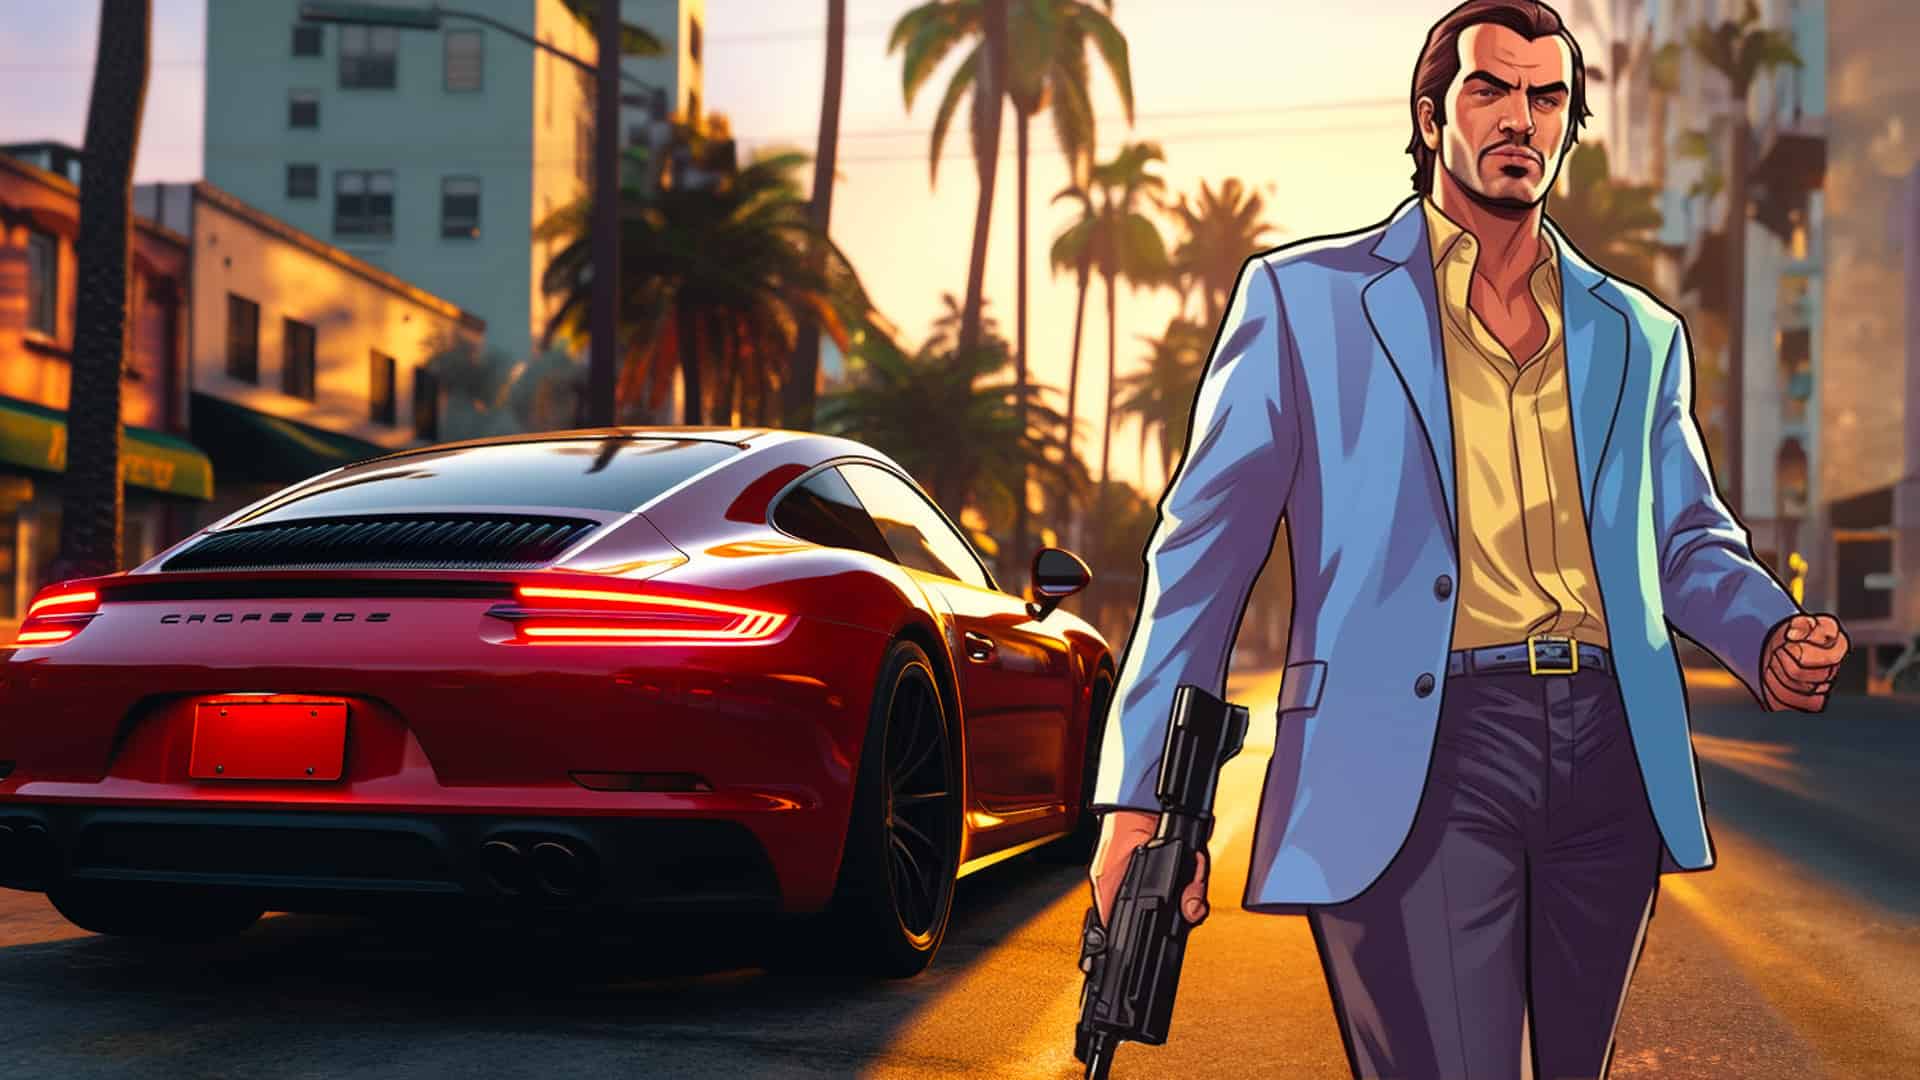 GTA 6 fans react to first look at 'badass' female character Lucia